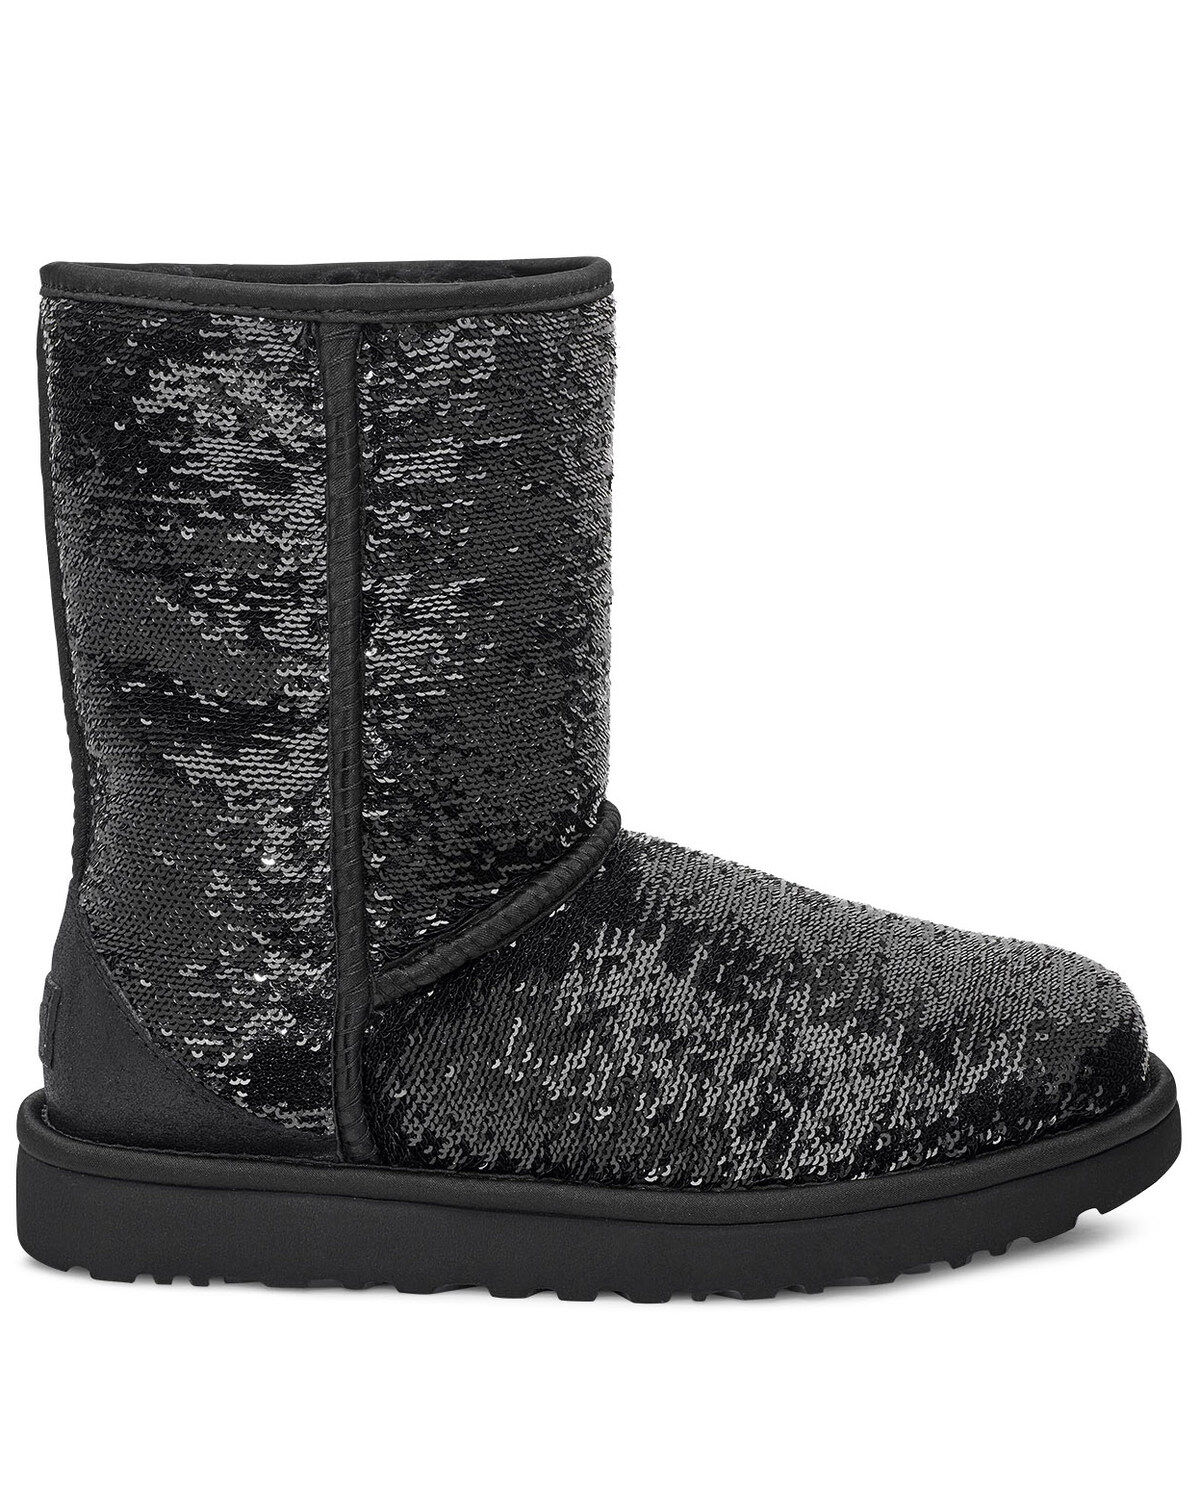 silver ugg boots